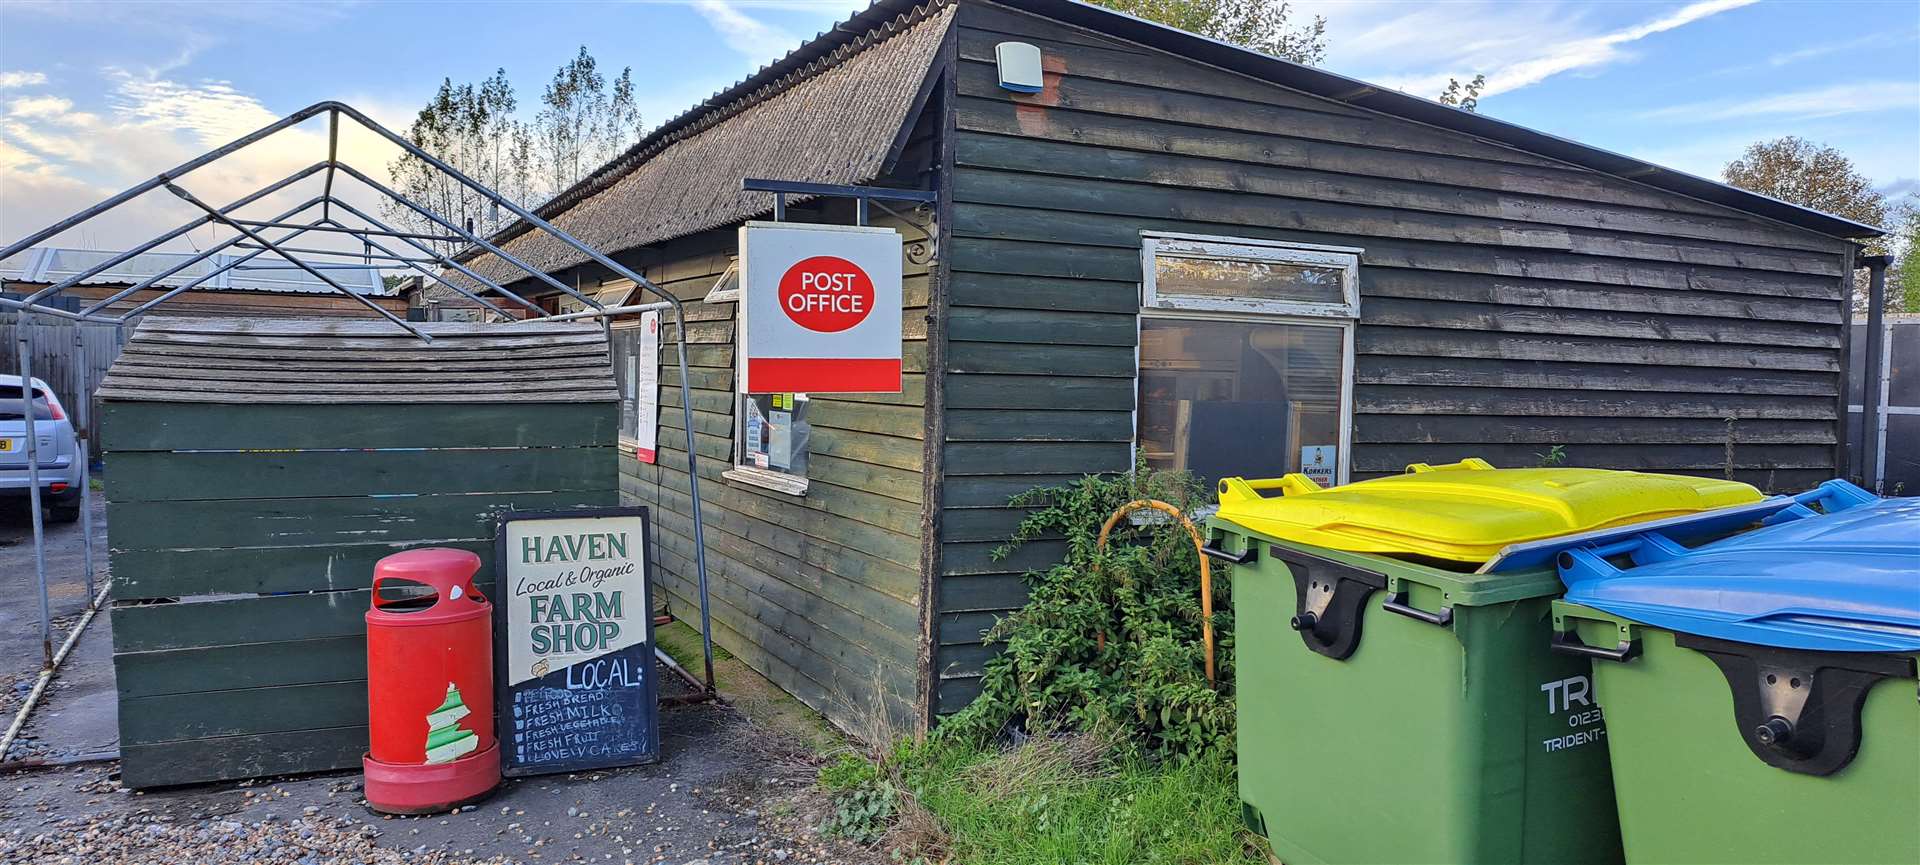 The Sutton Valence Post Office and Farm Shop